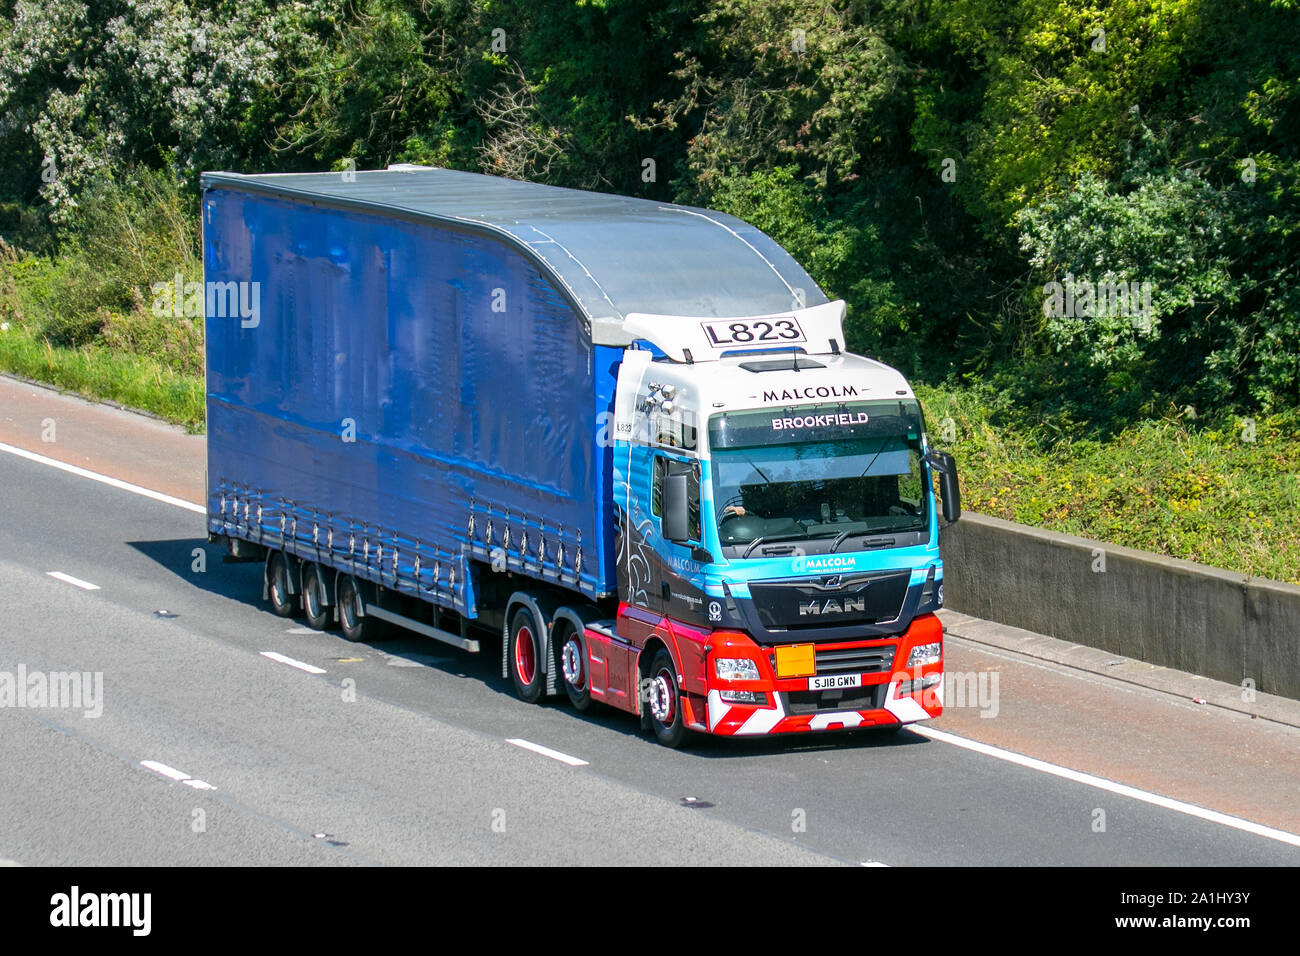 L823 Malcom (Brookfield) providing Logistics, Rail, Construction and Maintenance solutions; Heavy bulk Haulage delivery trucks, haulage, lorry, transportation, truck, cargo, MAN  vehicle, delivery, transport, industry, supply chain freight, on the M6 at Lancaster, UK Stock Photo